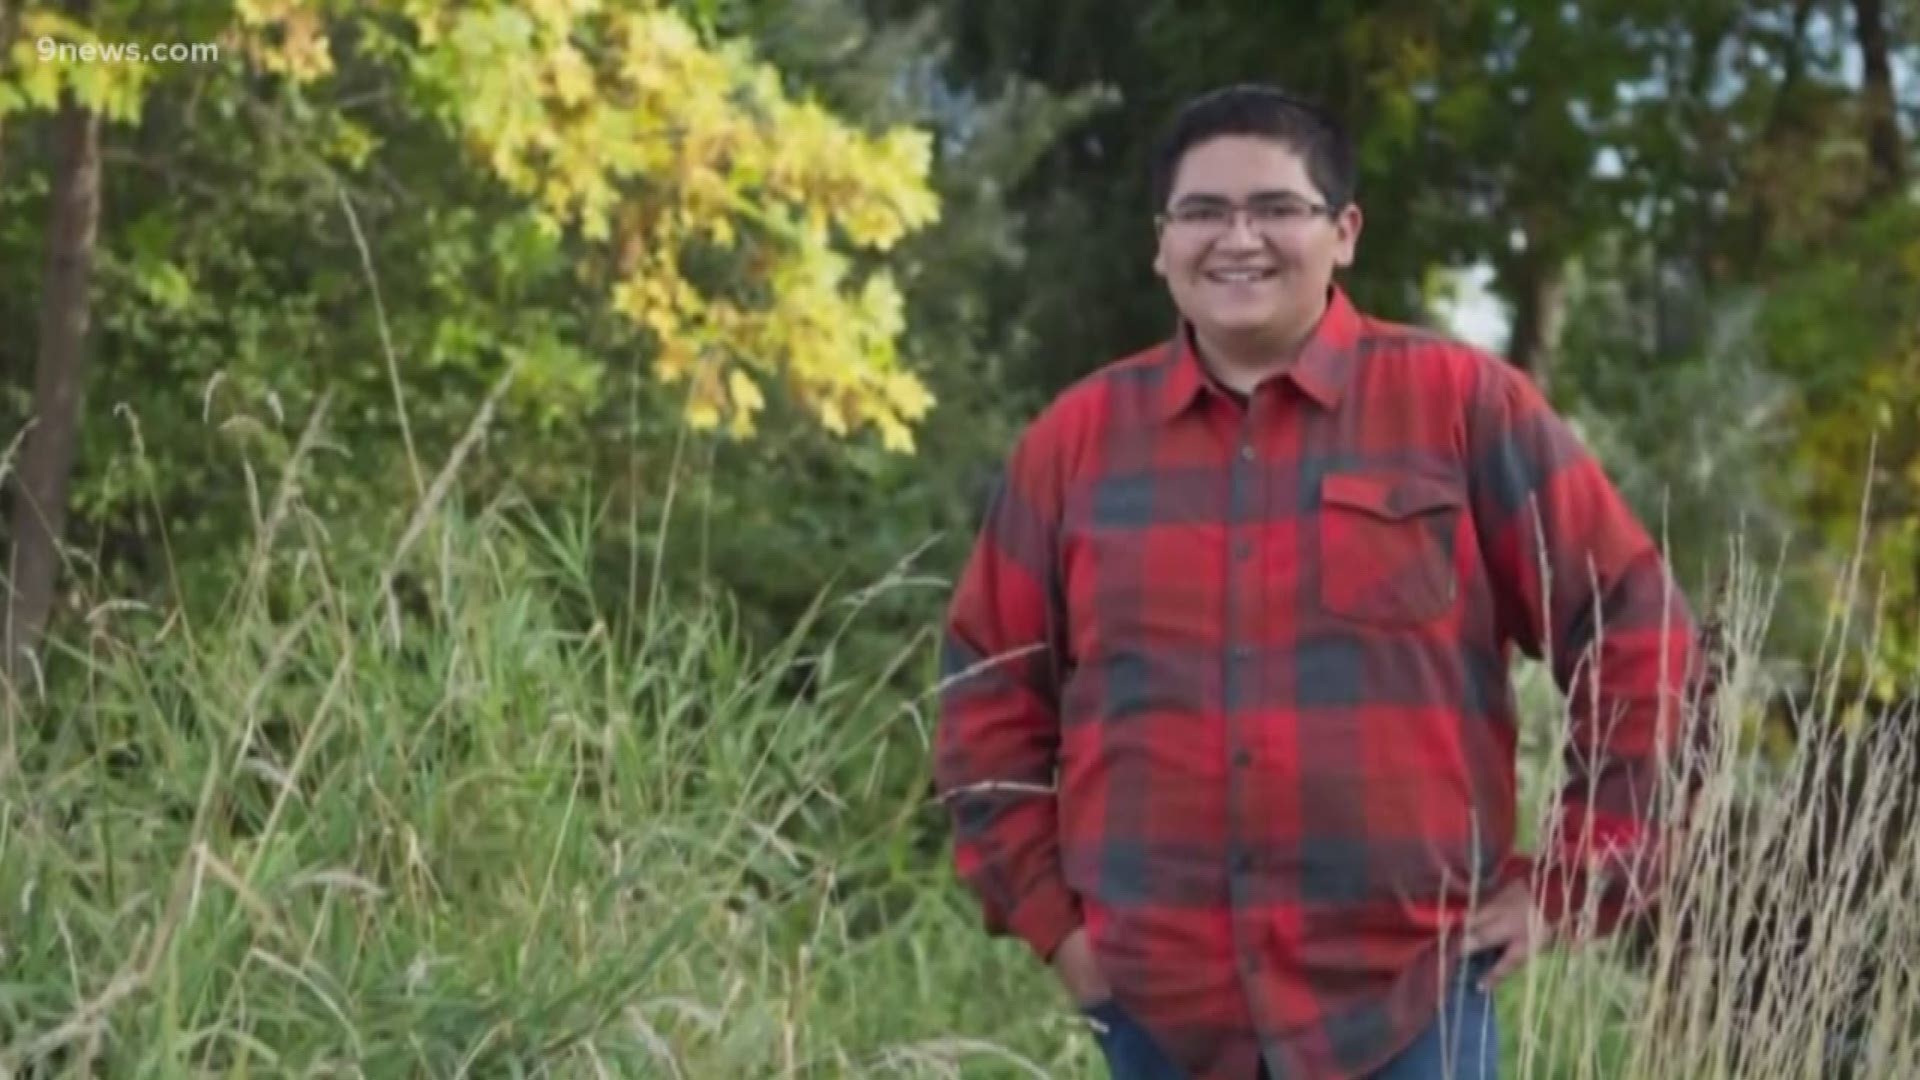 The 16-year-old had faced 46 counts related to the STEM School Highlands Ranch shooting in May 2019 that killed Kendrick Castillo and injured several others.